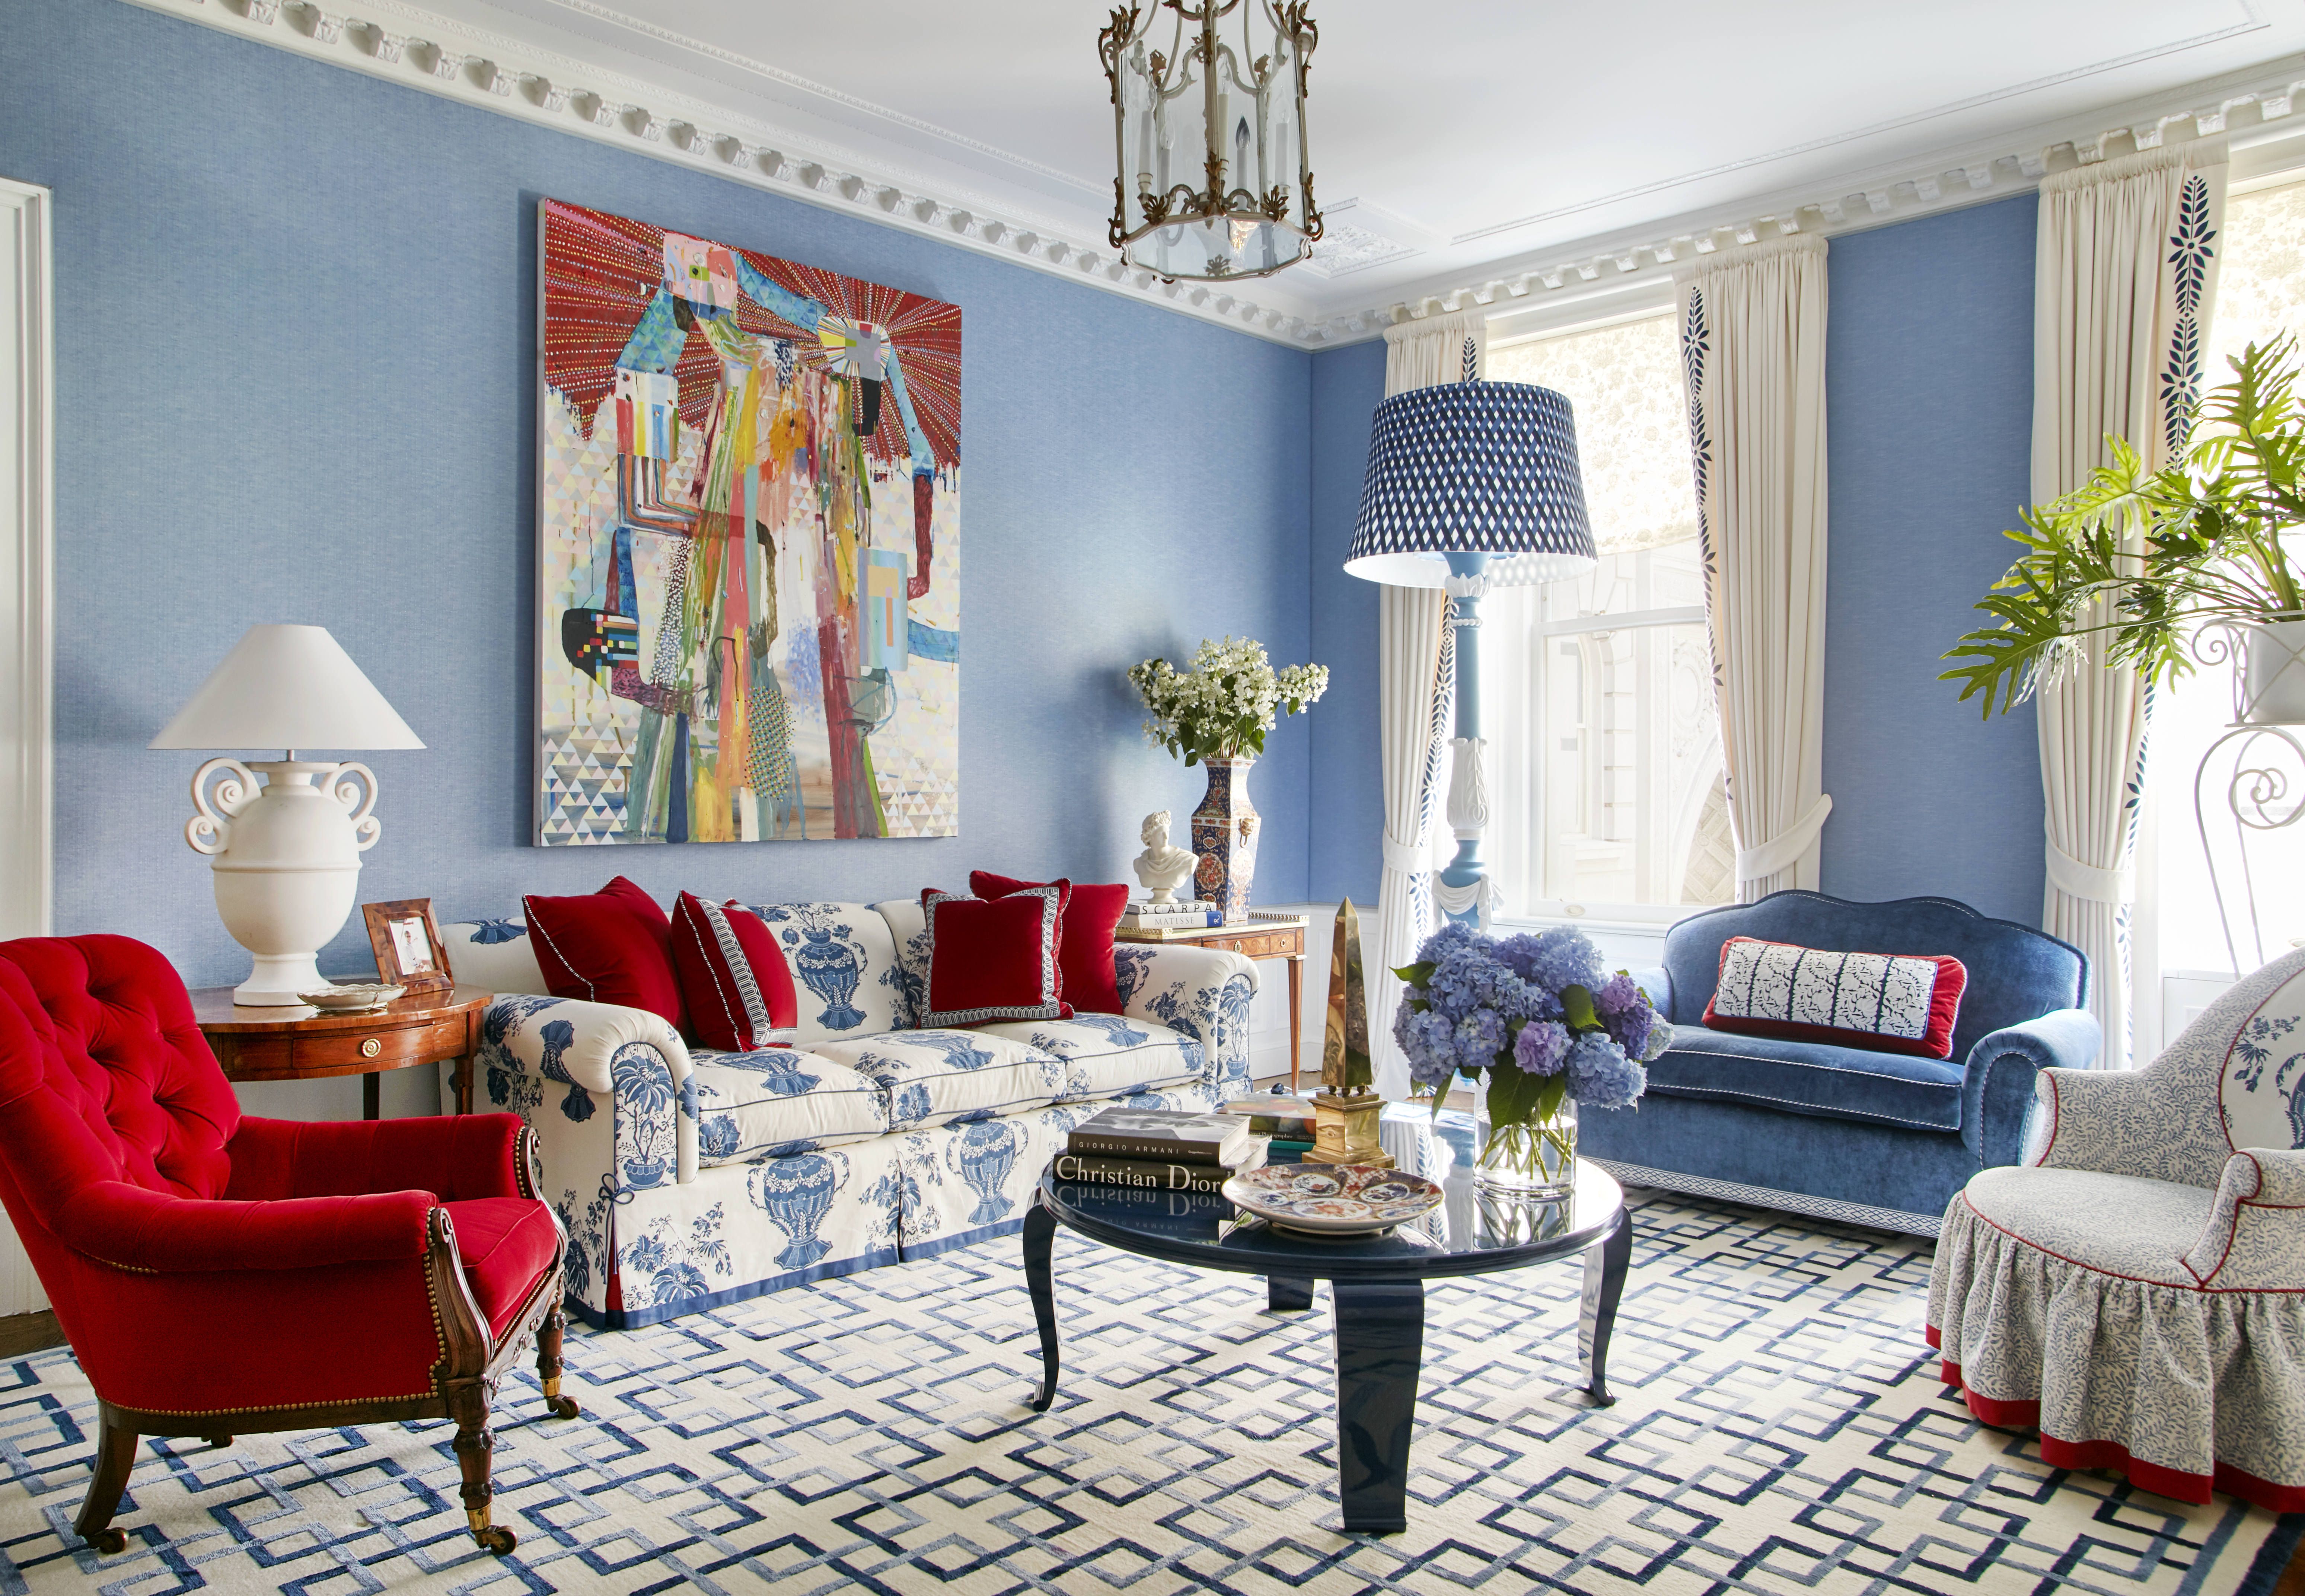 25 of the Best Blue Paint Color Options for a Living Room